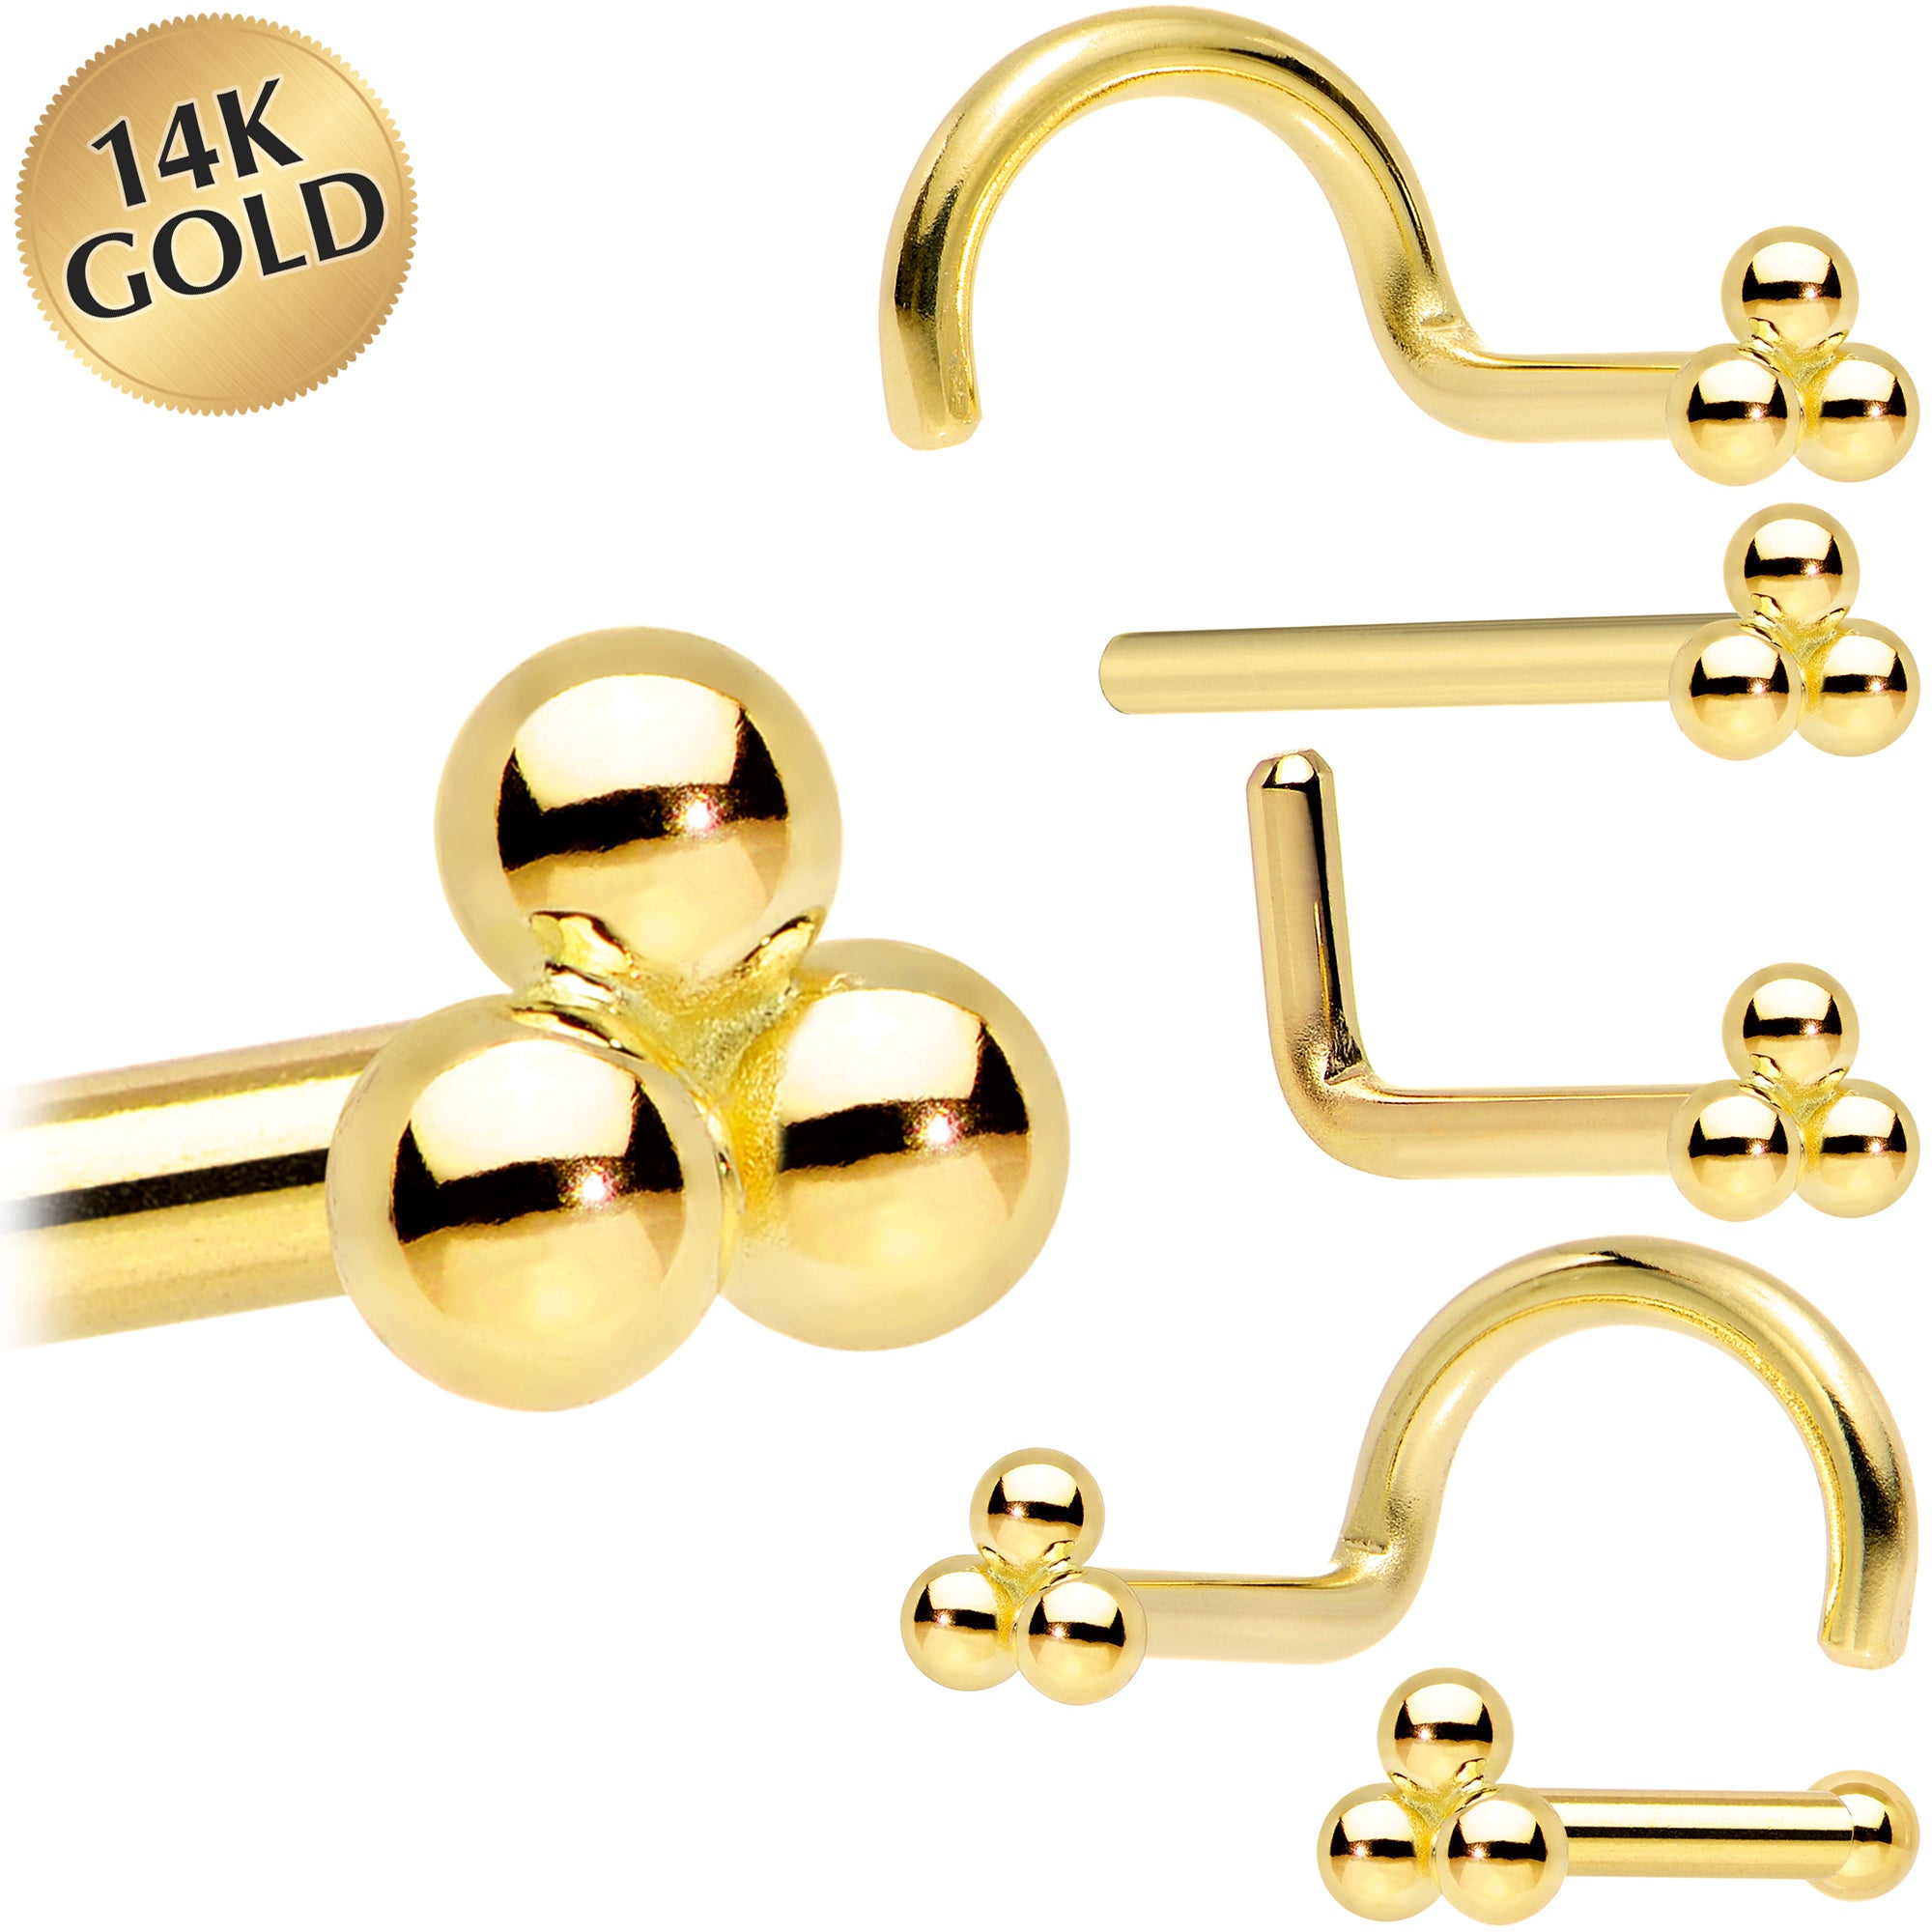 Amazon.com: Thin Nose Rings Hoops for Women/Men,Tiny Small Gold Nose Rings  24g for Nose Piercings (1pc - 24 gauge - 6mm,14K Gold Filled) : Handmade  Products